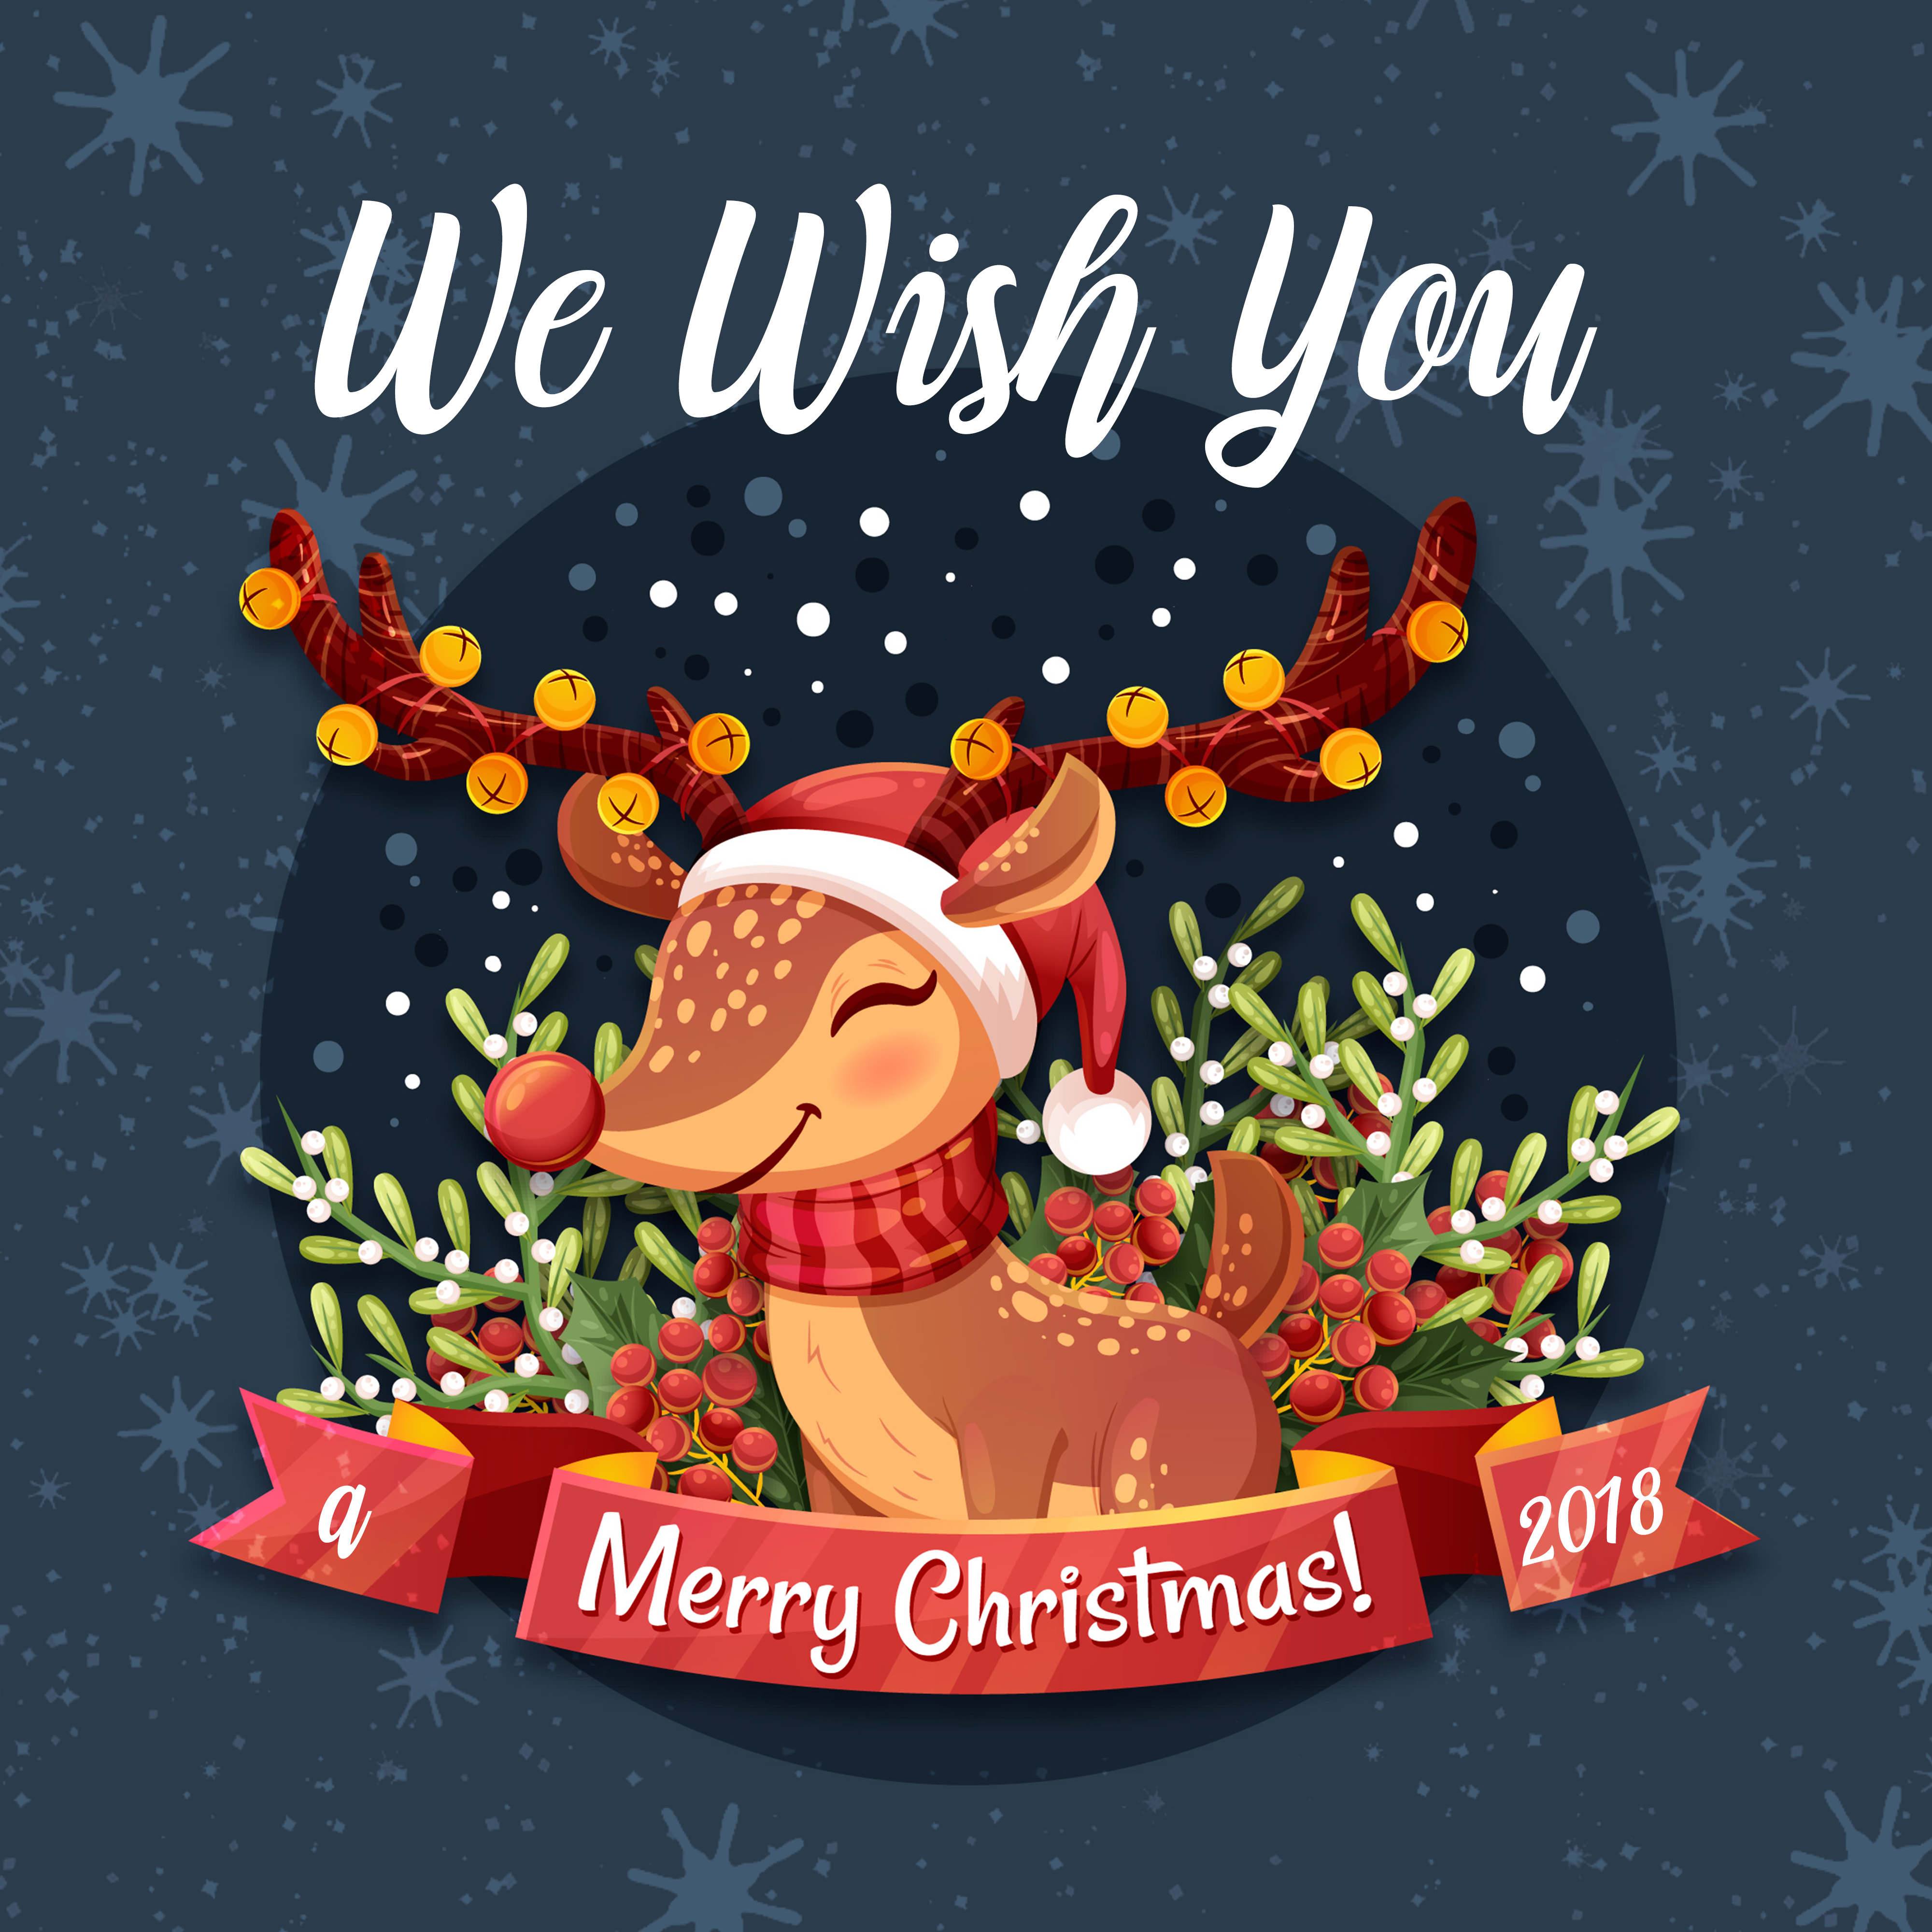 We Wish You a Merry Christmas 2018